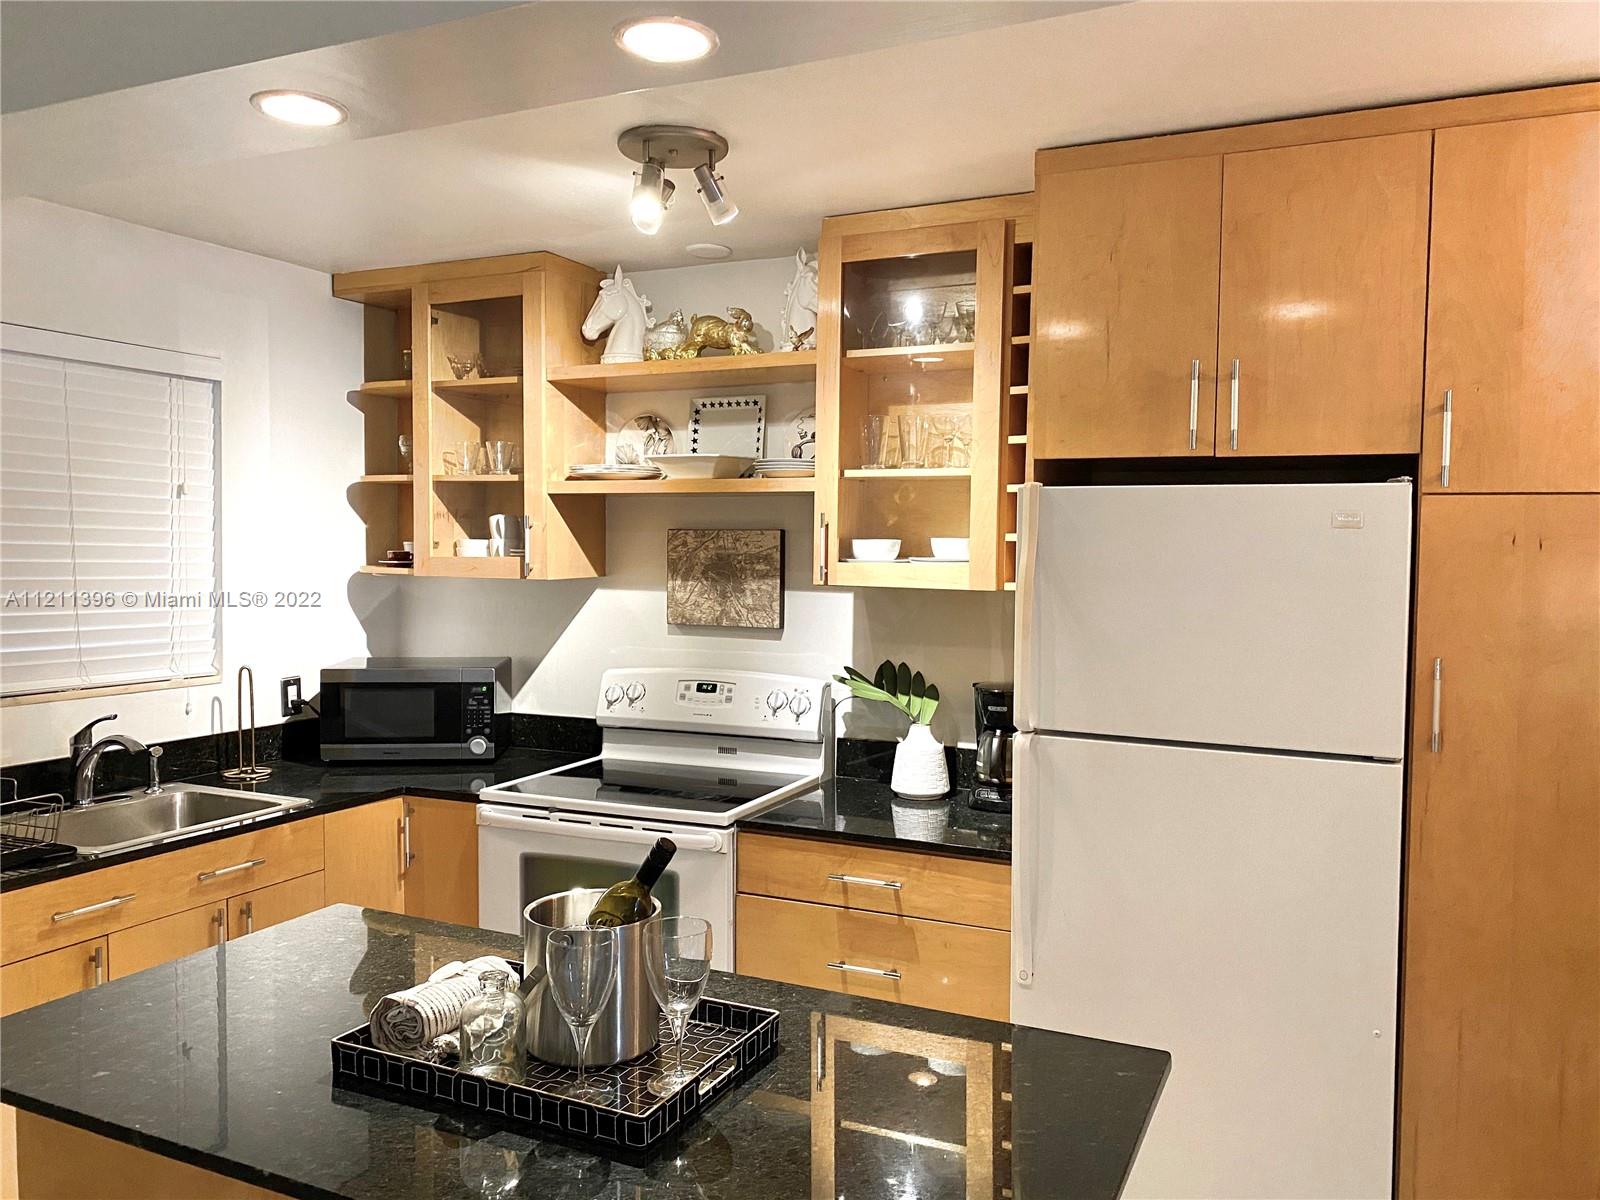 Spacious, fully furnished 1/1 in the heart of Coconut Grove. Rental is for 6 months and is ALL UTLITIES INCLUDED for $2700/m. Tastefully furnished with everything you need. Walking distance from Cocowalk, Bayshore Dr., parks, and Biscayne Bay, incredible location. Call listing agent.